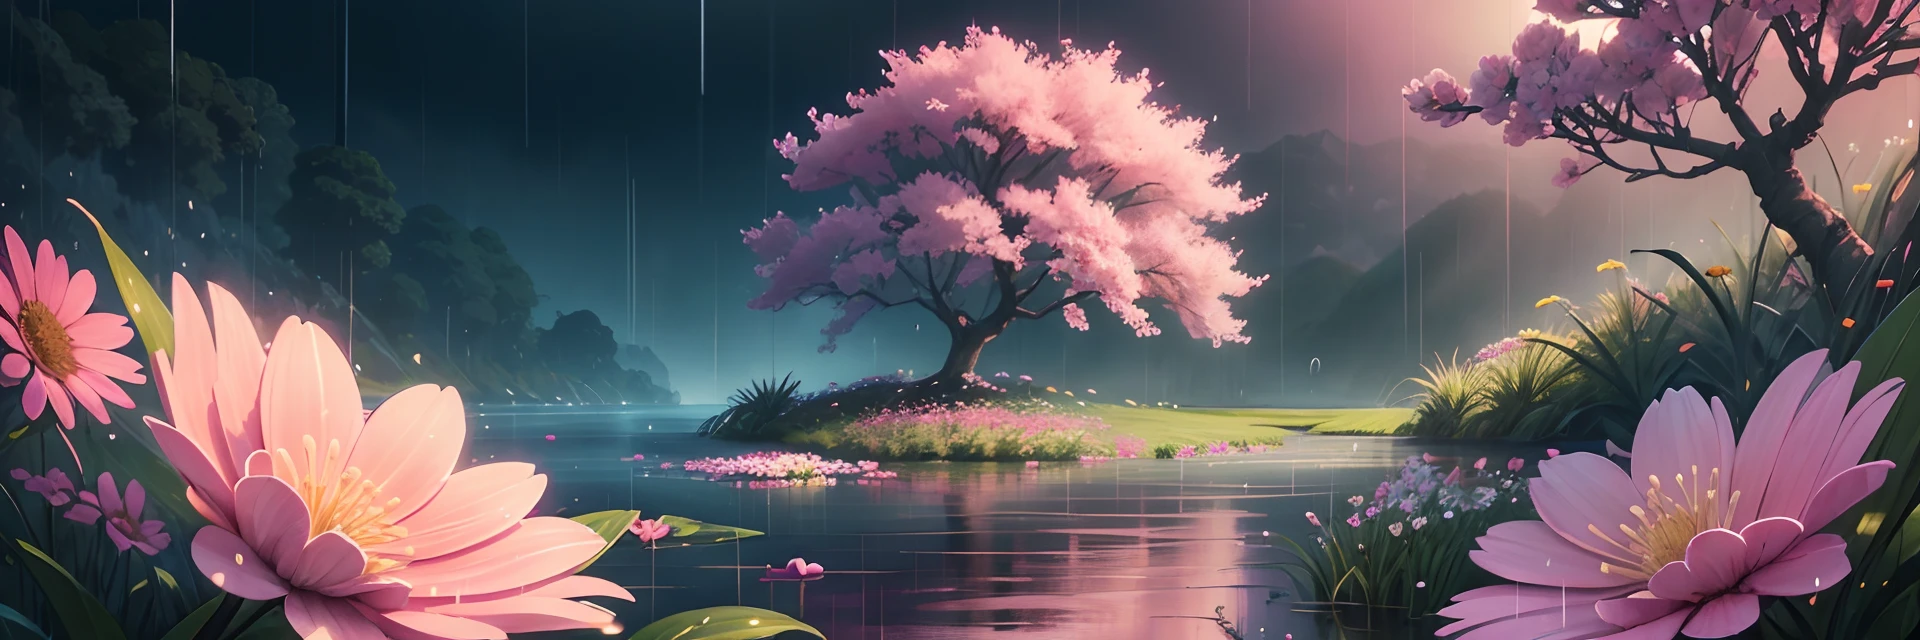 Nature, relaxing, peace , raining, flowers, blossoms, pink, pink color theme, monsoon , fresh,  happy , rainy weather ,colorful, happy, simple picture, close-up, visual impact, 3D DreamWorks style,